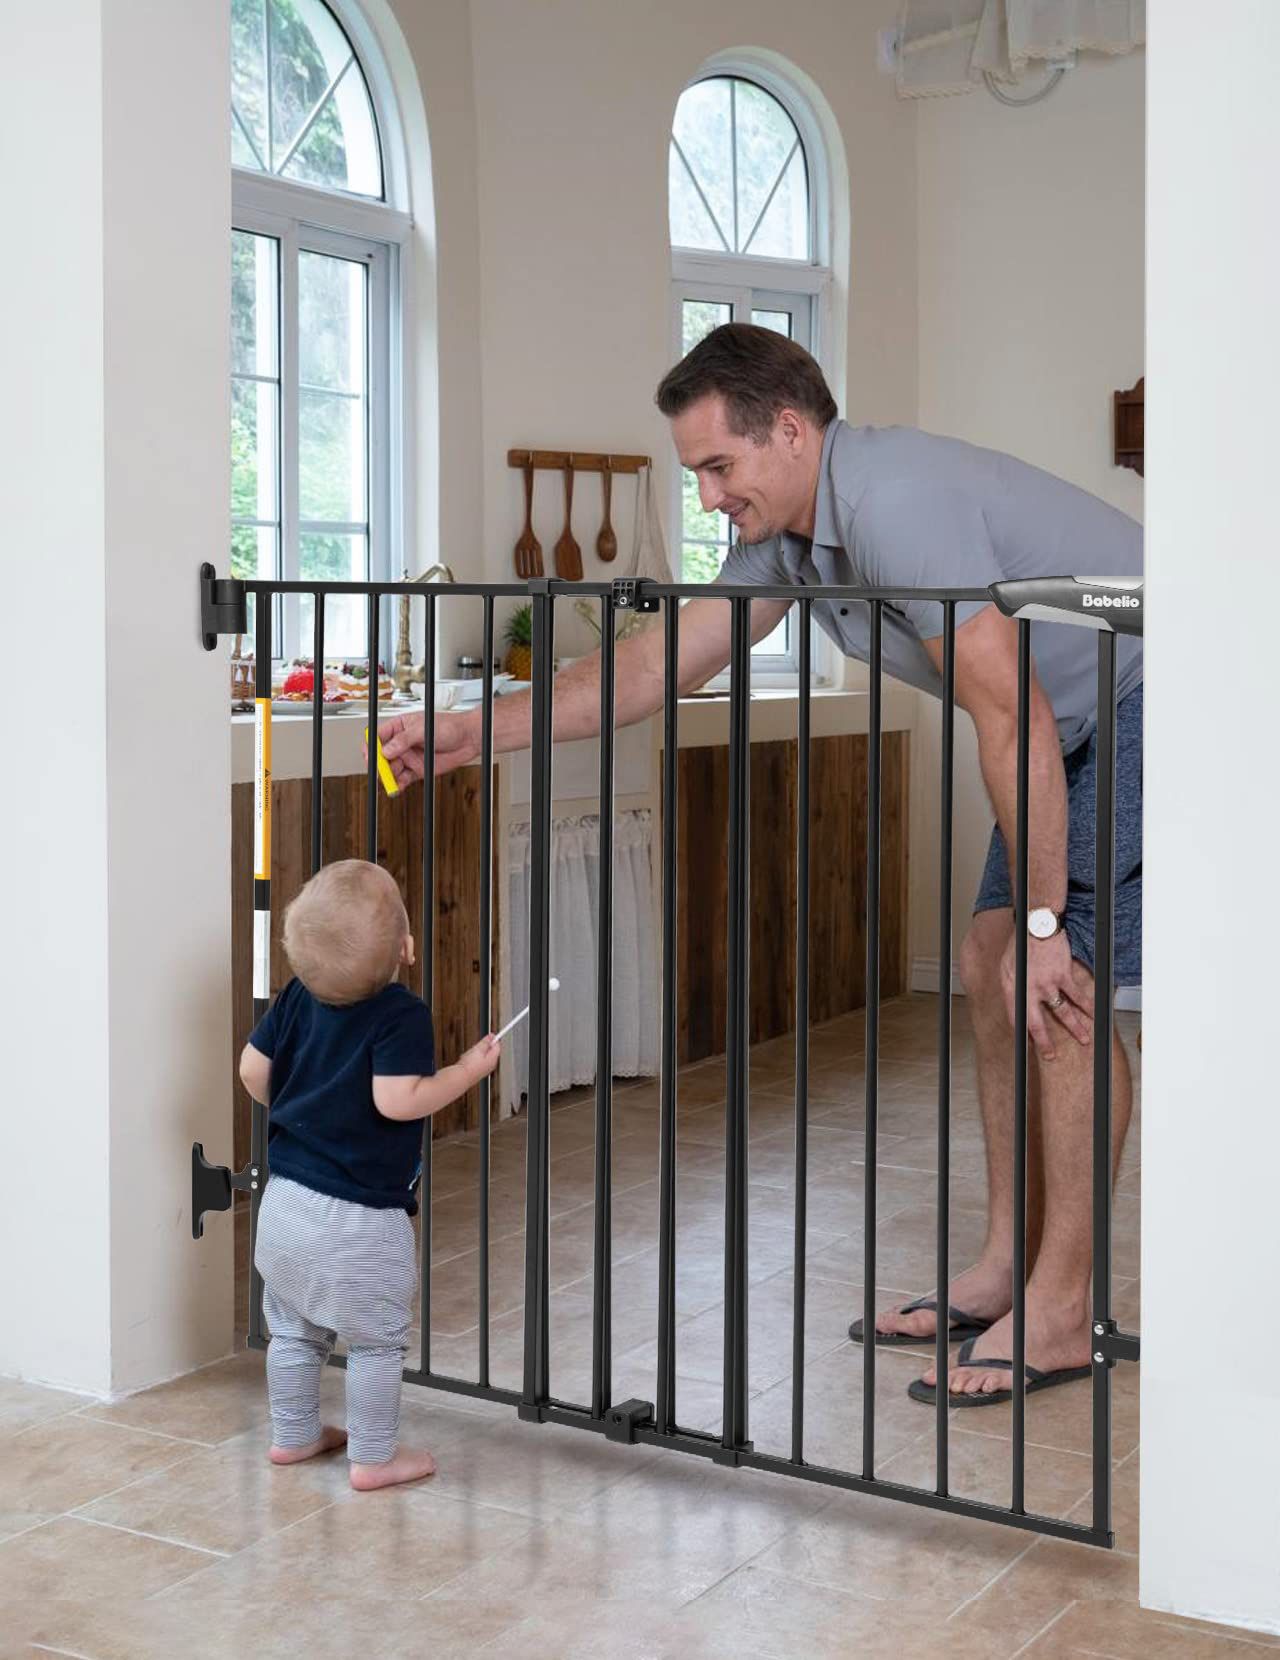  Babelio 34" Extra Tall Baby/Dog Gate With No Threshold Design Walk Thru Door, 26-43" Auto Close Safety Gate For Babies, Elders And Pets, Fits Doorway